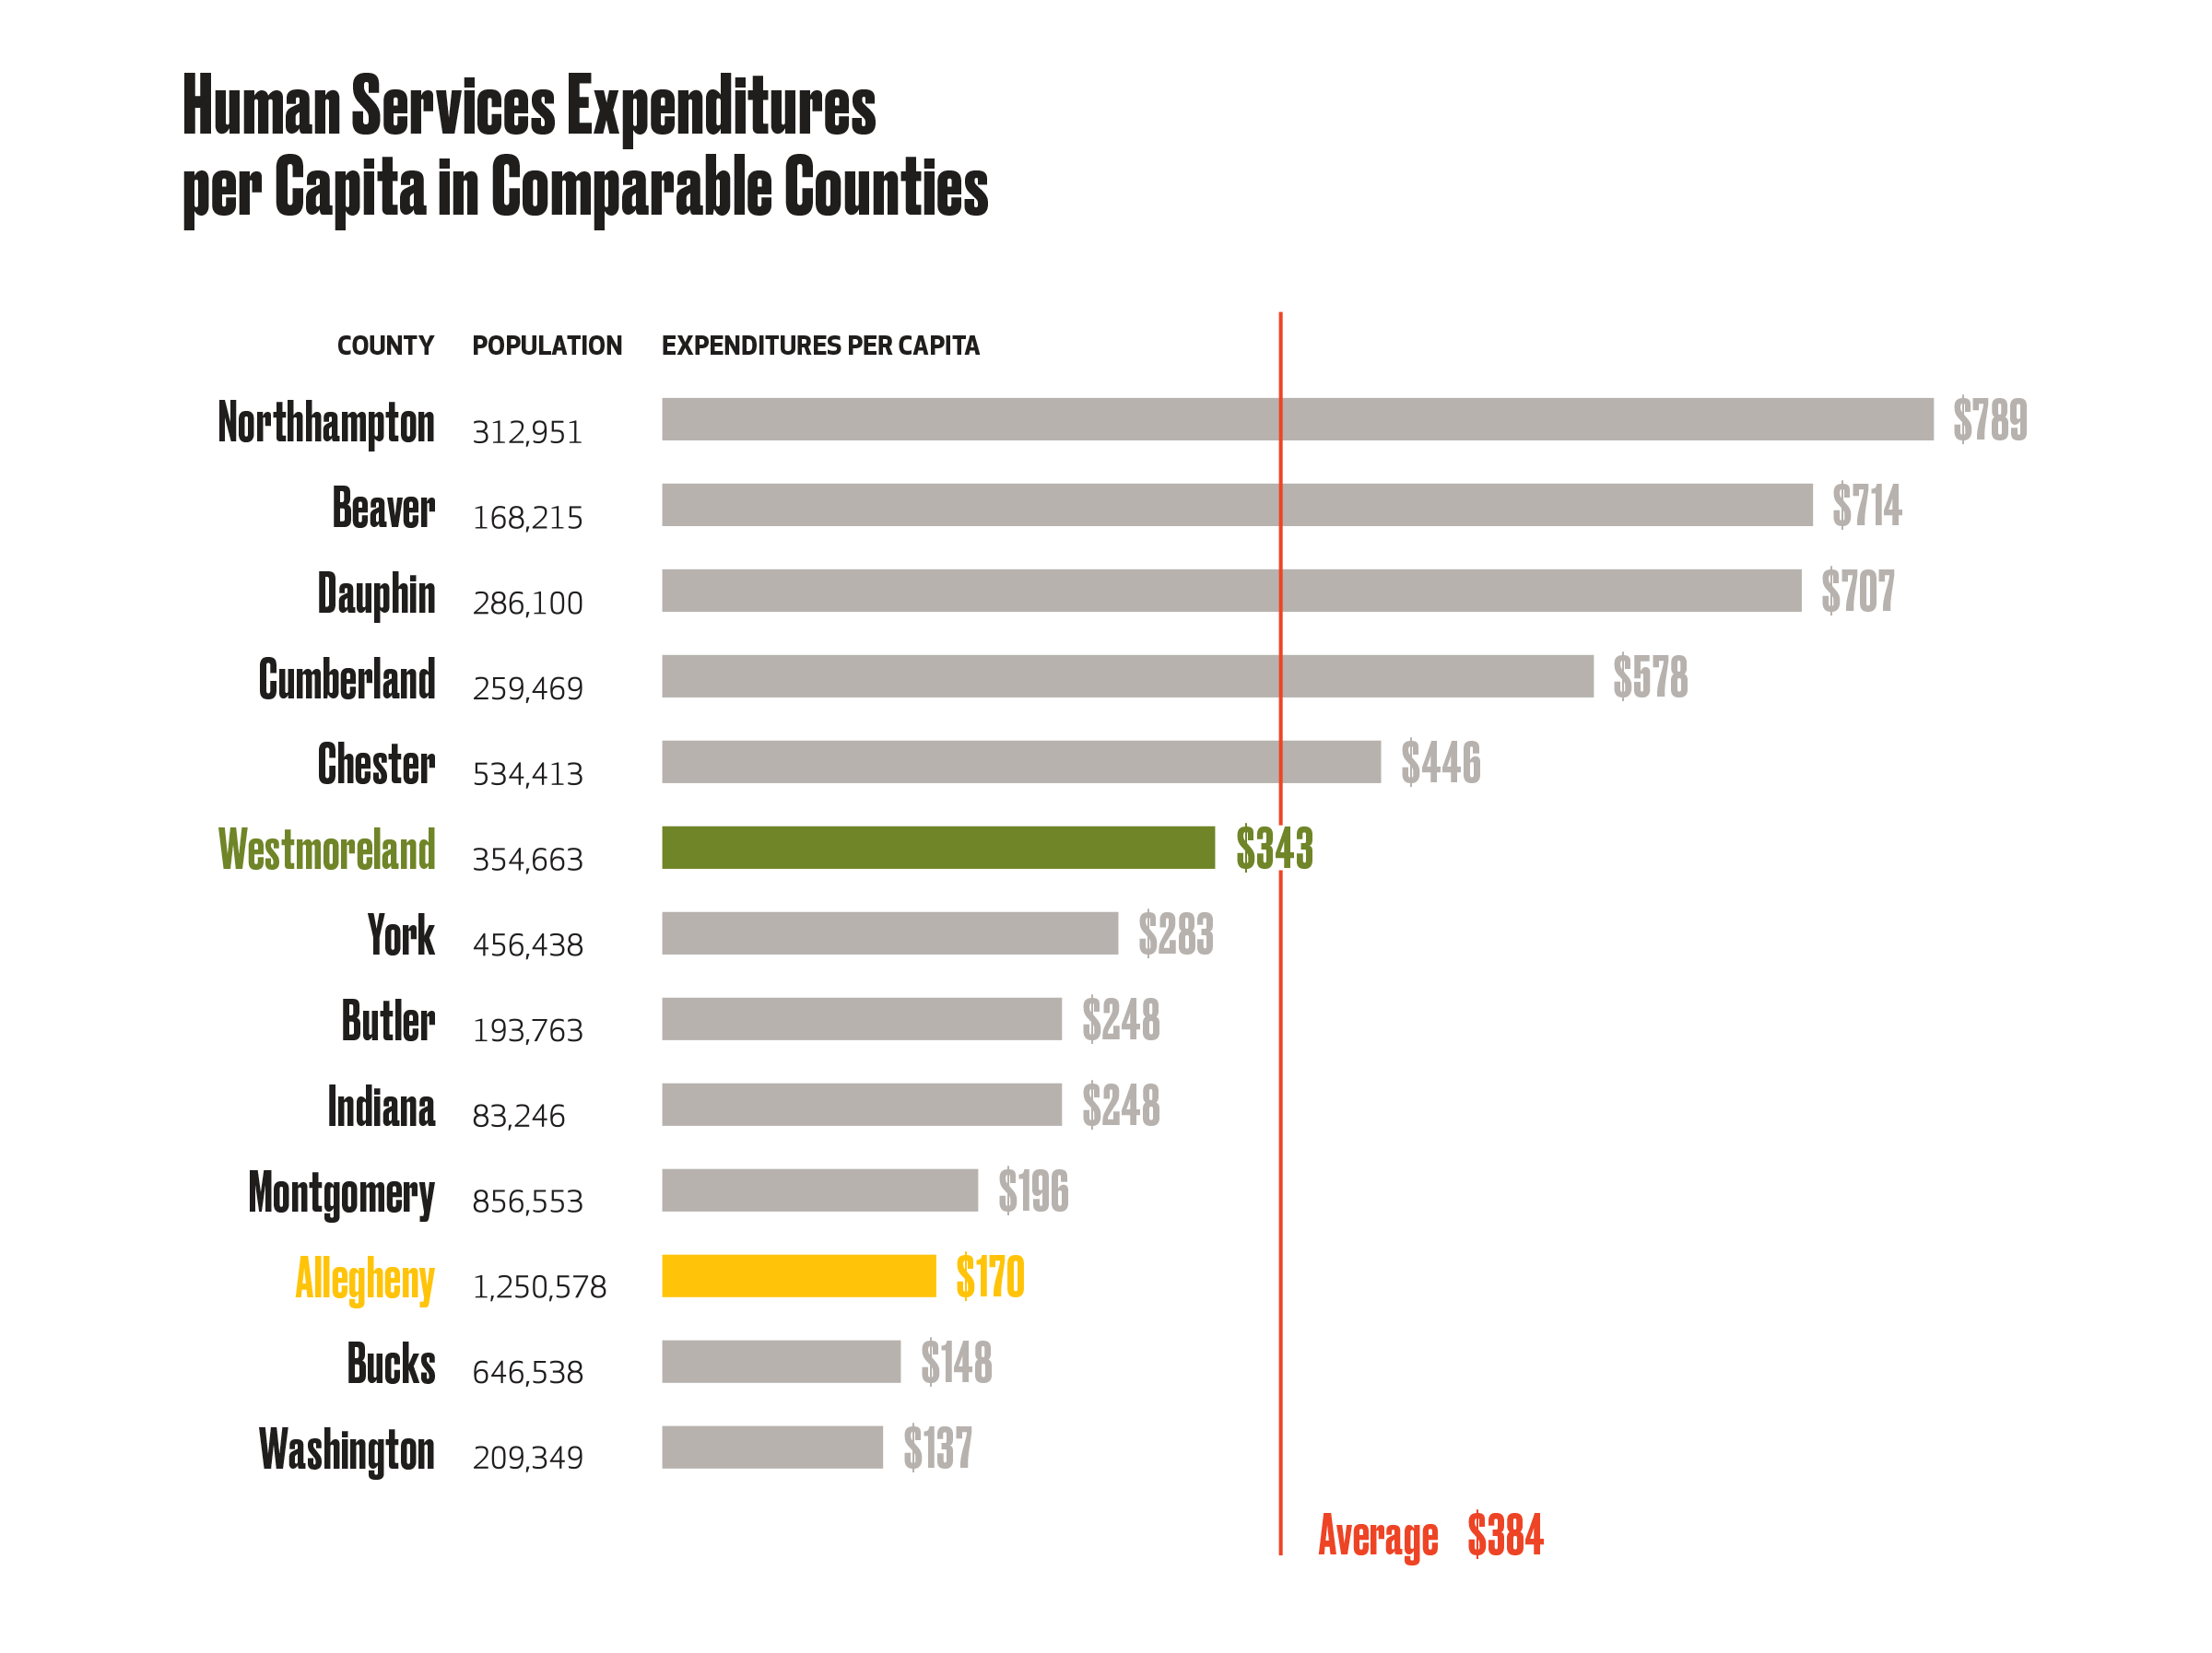 Human services expenditures per capita by comparable counties.